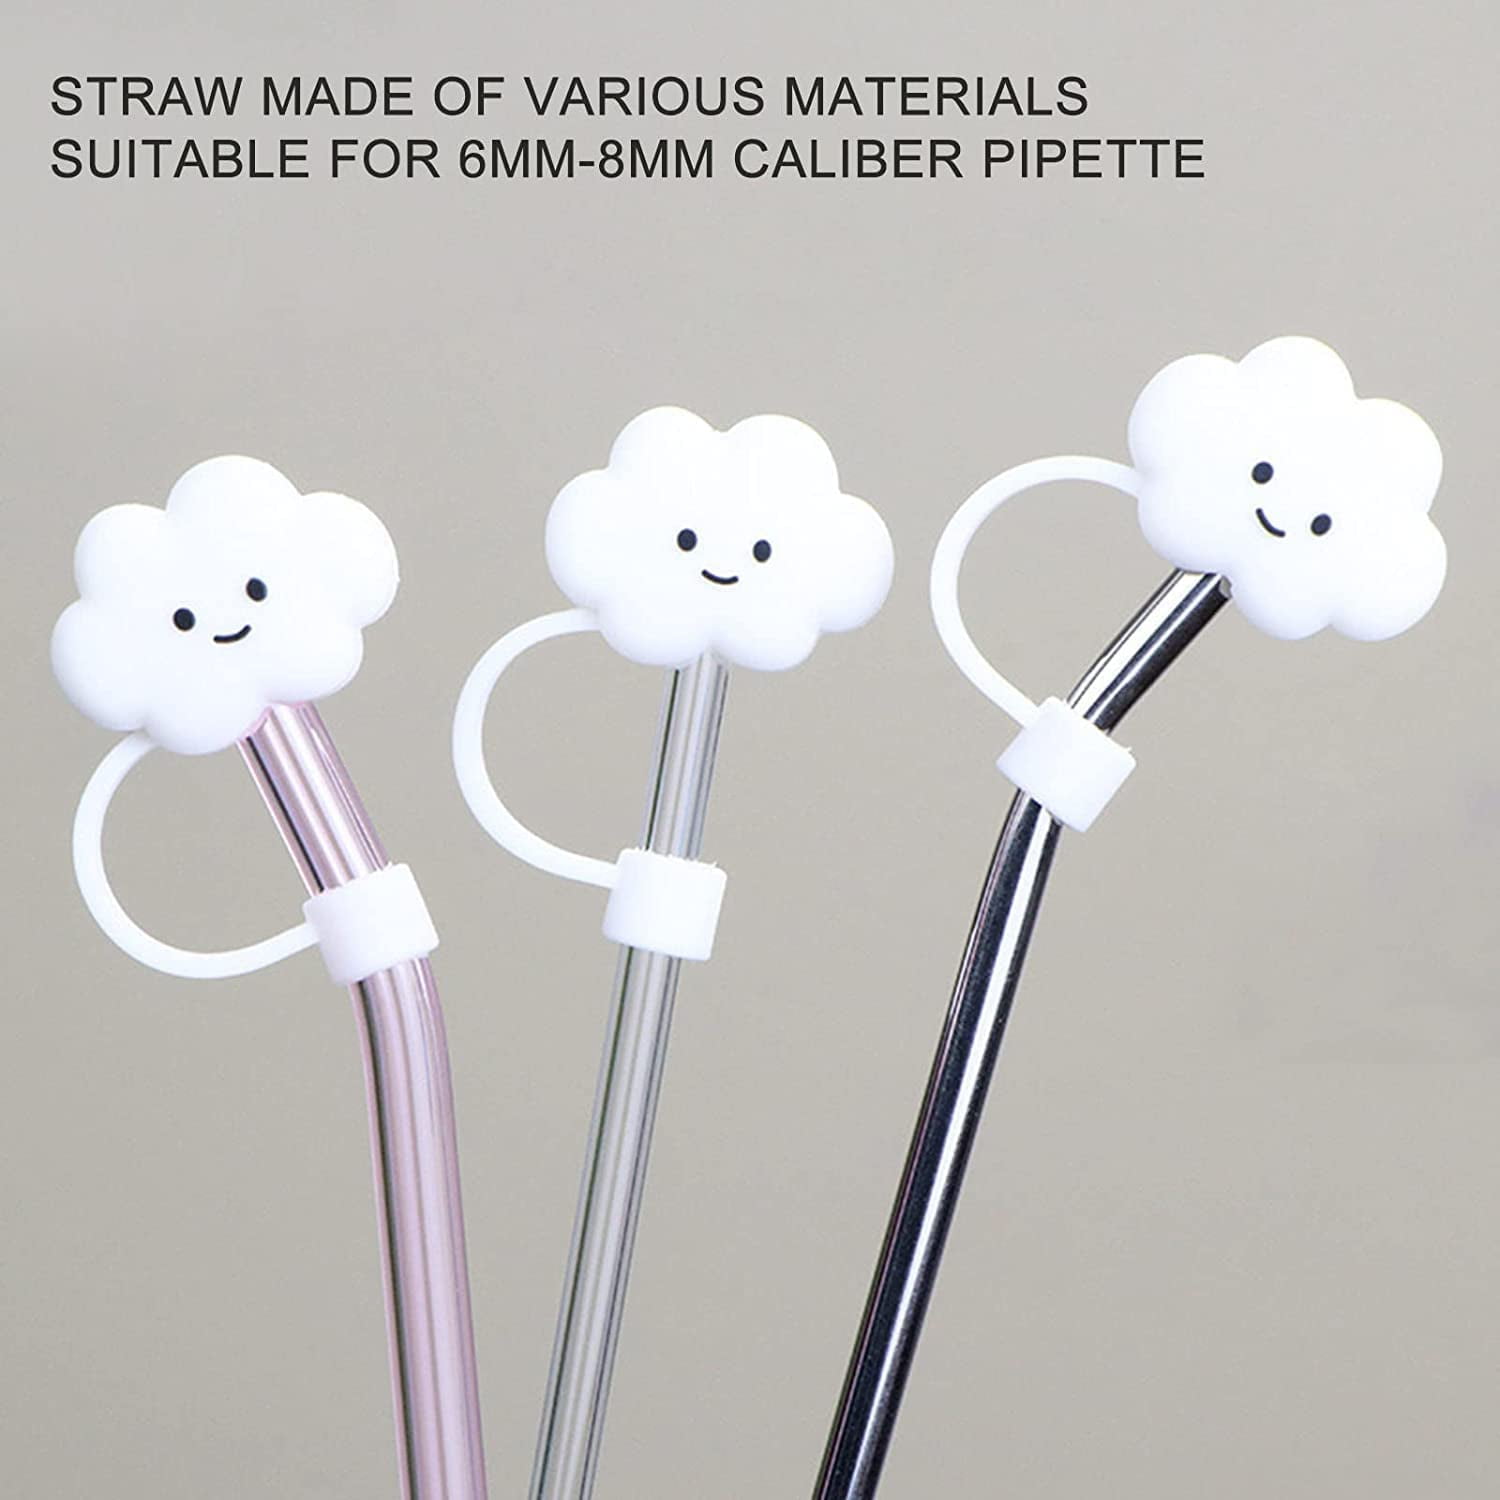 2pcs Cute Straw Tips Cover Straw Covers Cap for Reusable Straws Straw Protector Cute Holiday Style (Blue Star)